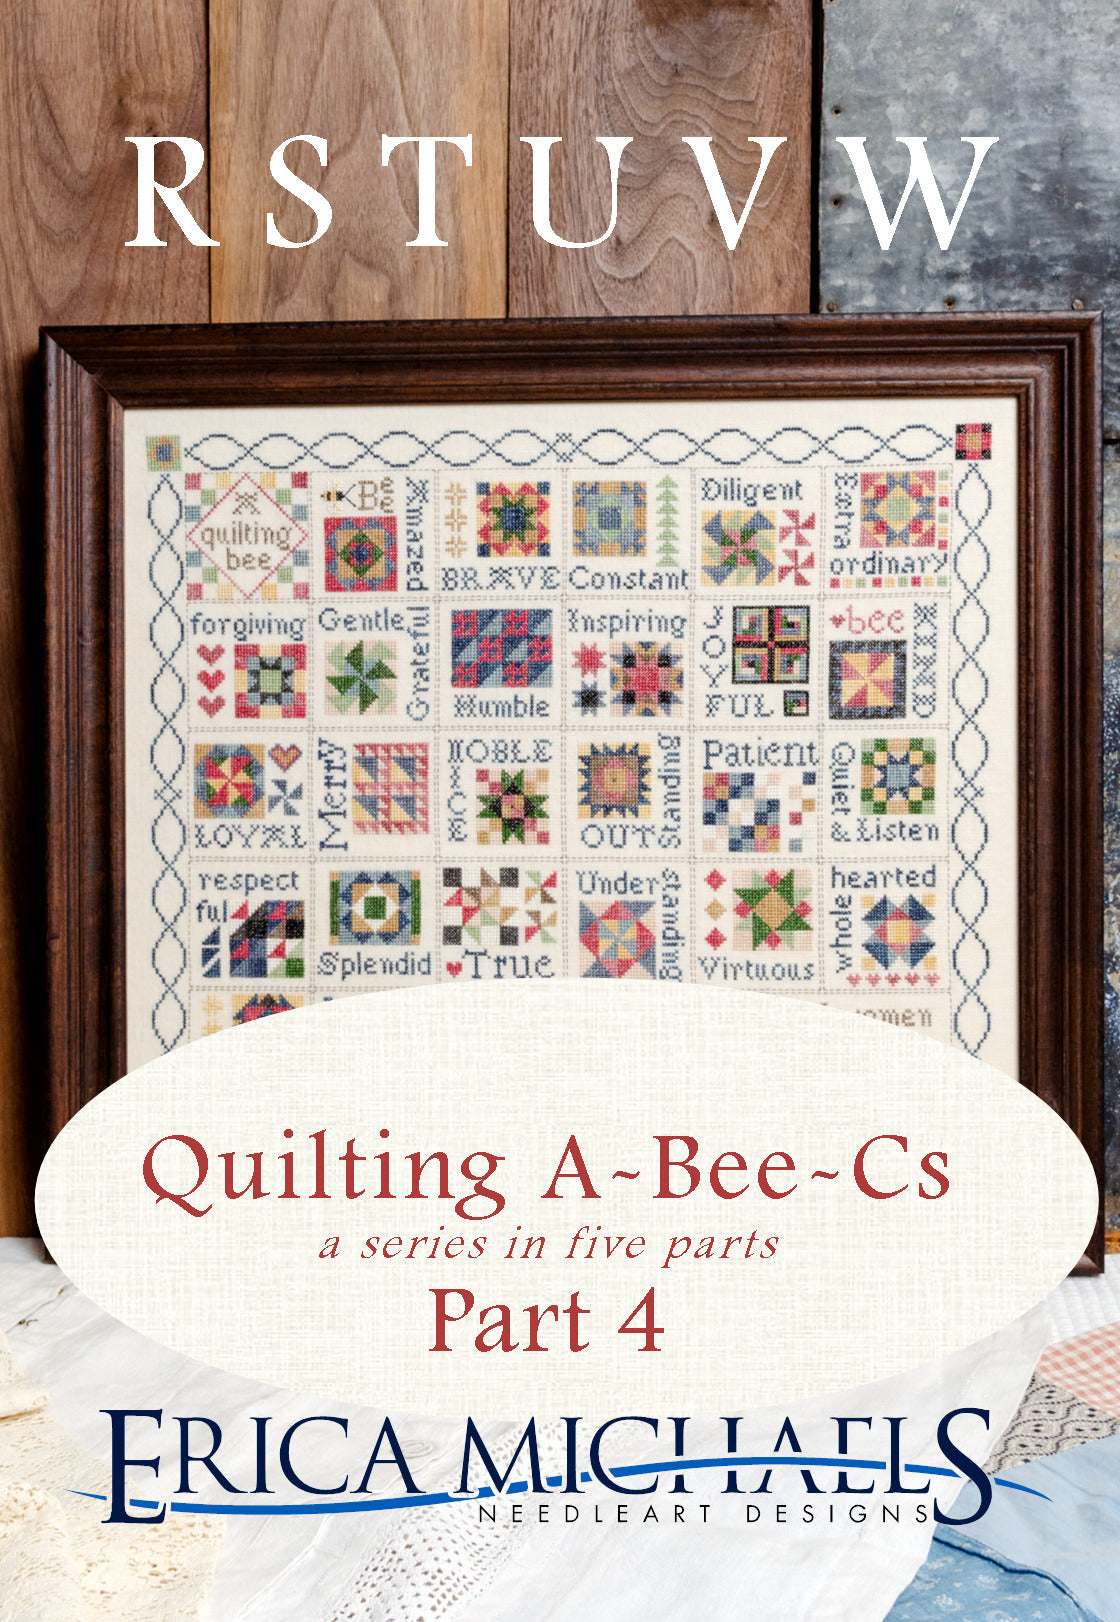 How to Frame Quilt Pieces